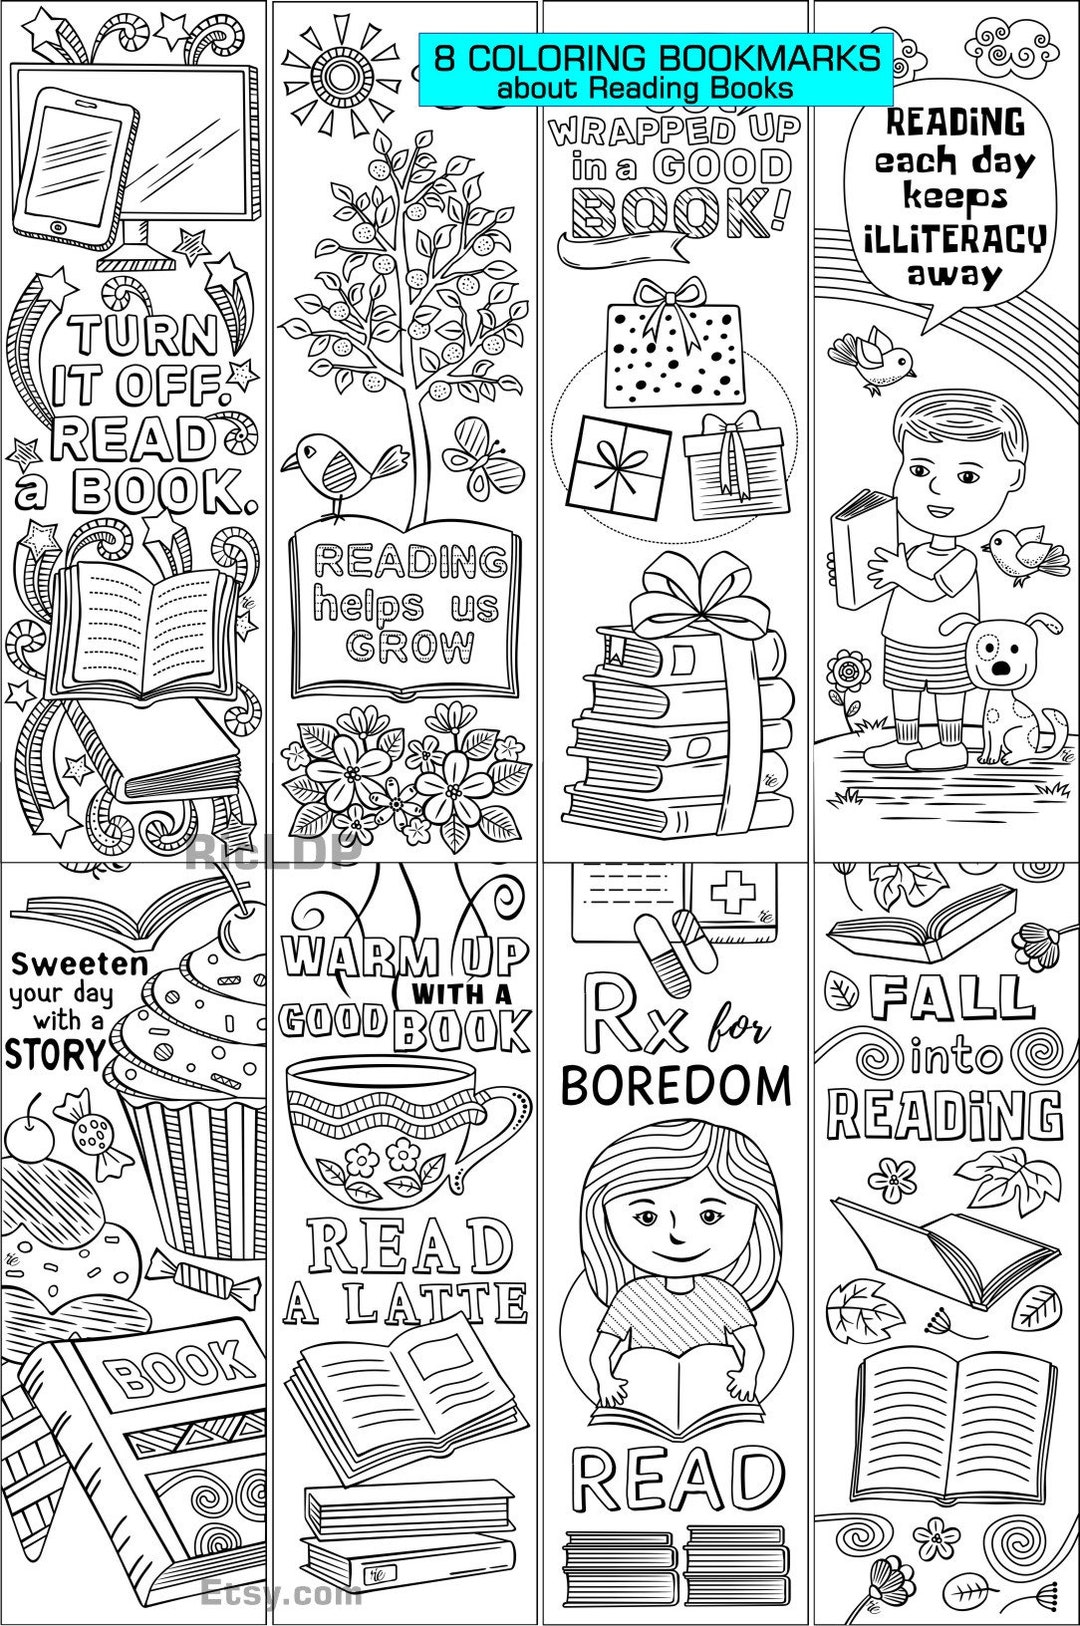 8 Coloring Bookmarks About Reading Cute Markers With Images of Books, Boy,  Girl, Birds, Coffee Inspiring Phrases Digital Download 